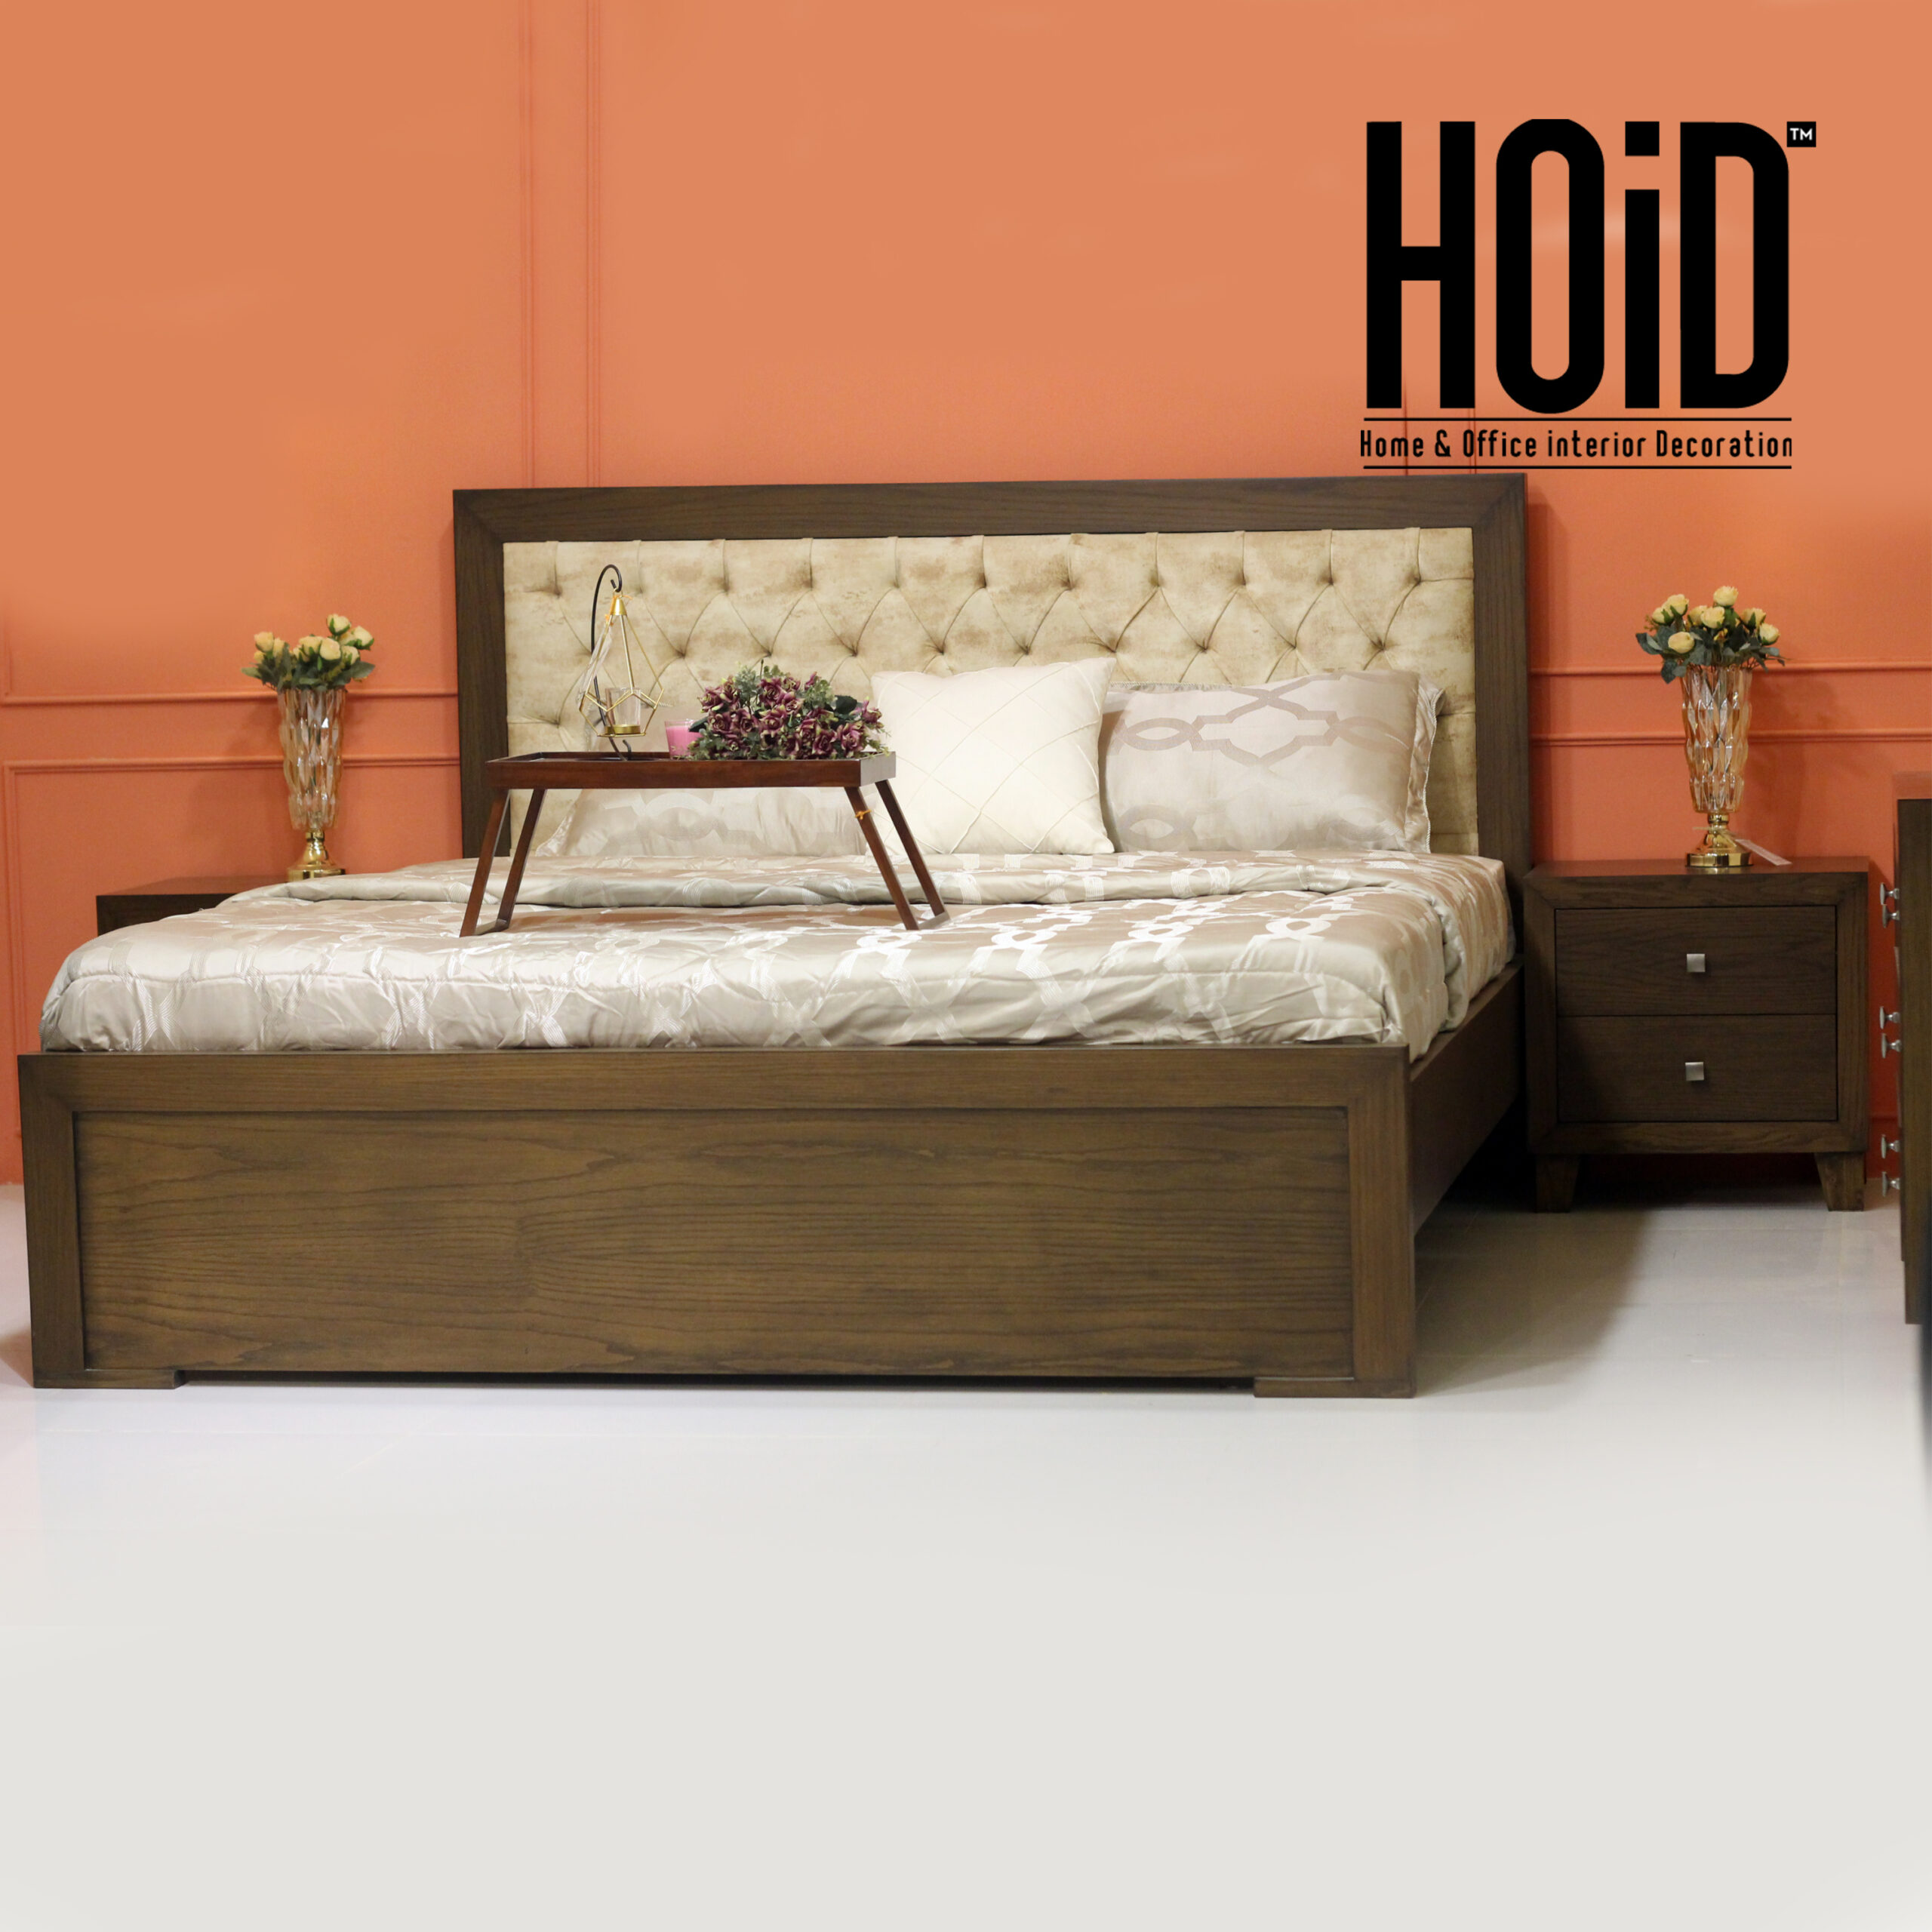 brid-bed-with-2-side-tables-scaled-2.jpg